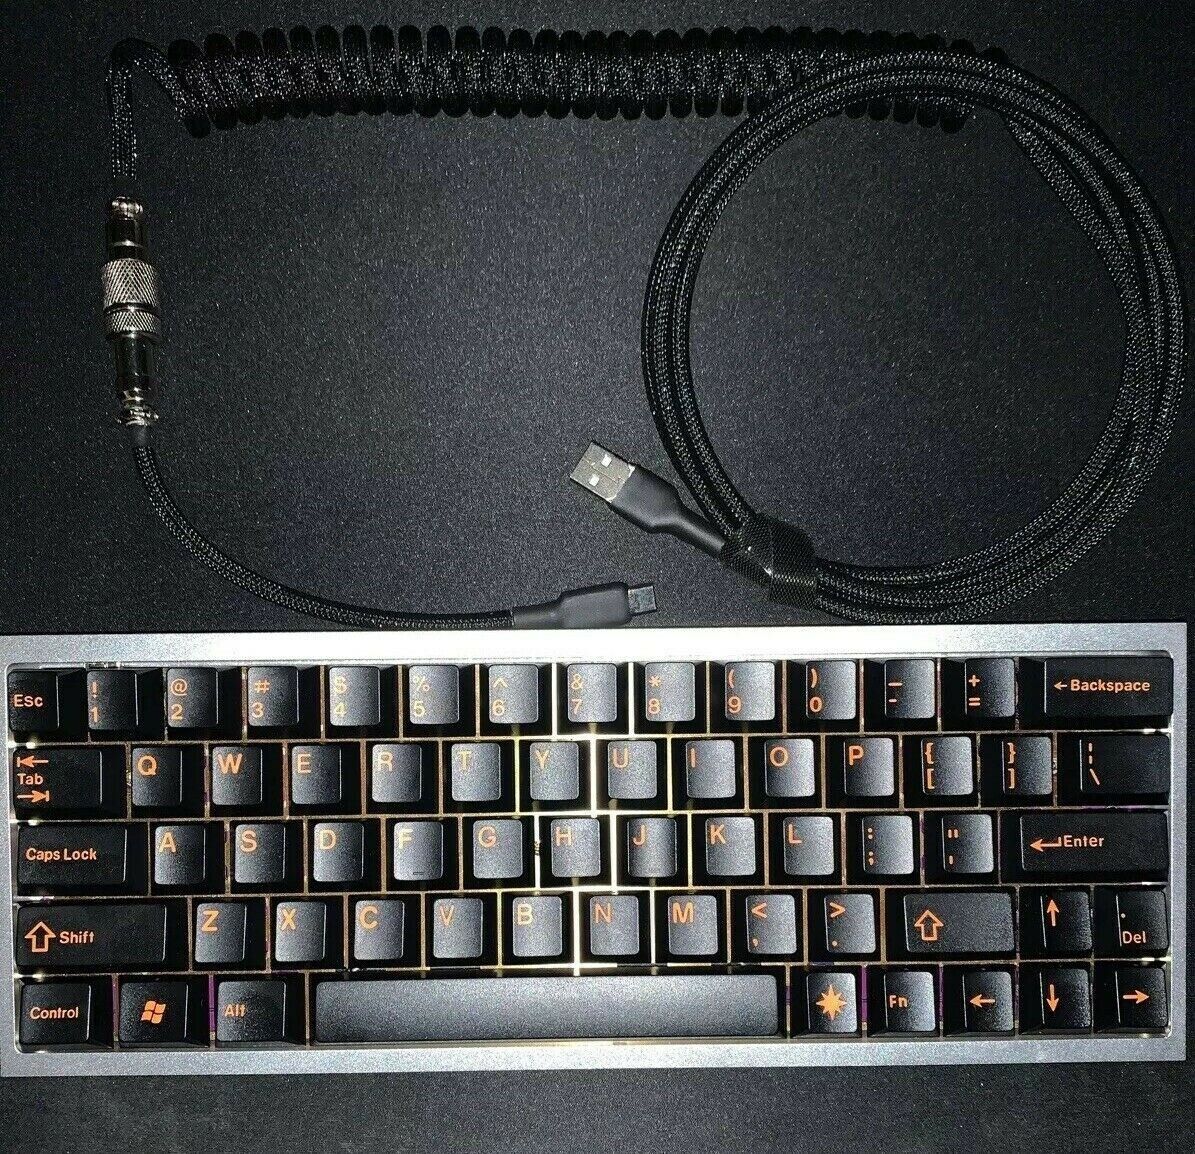 KBDFANS TOFU 60% DZ60, RGB Hot Swap 65g Zealios,Brass Plate,Jumbo Coiled Cable.